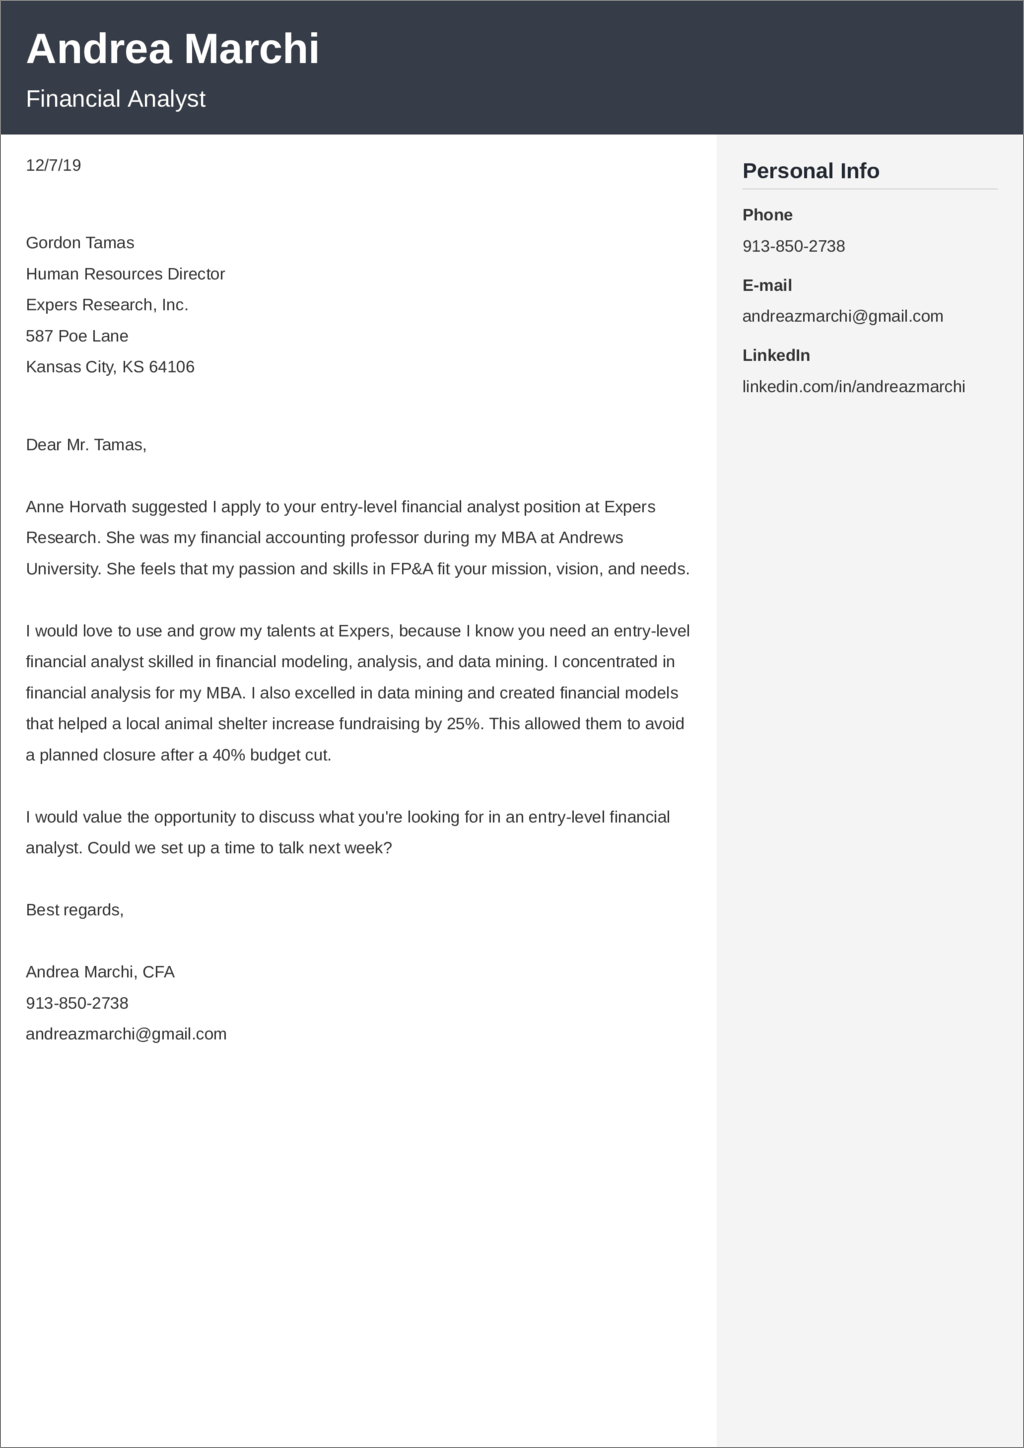 cover letter for corporate finance analyst